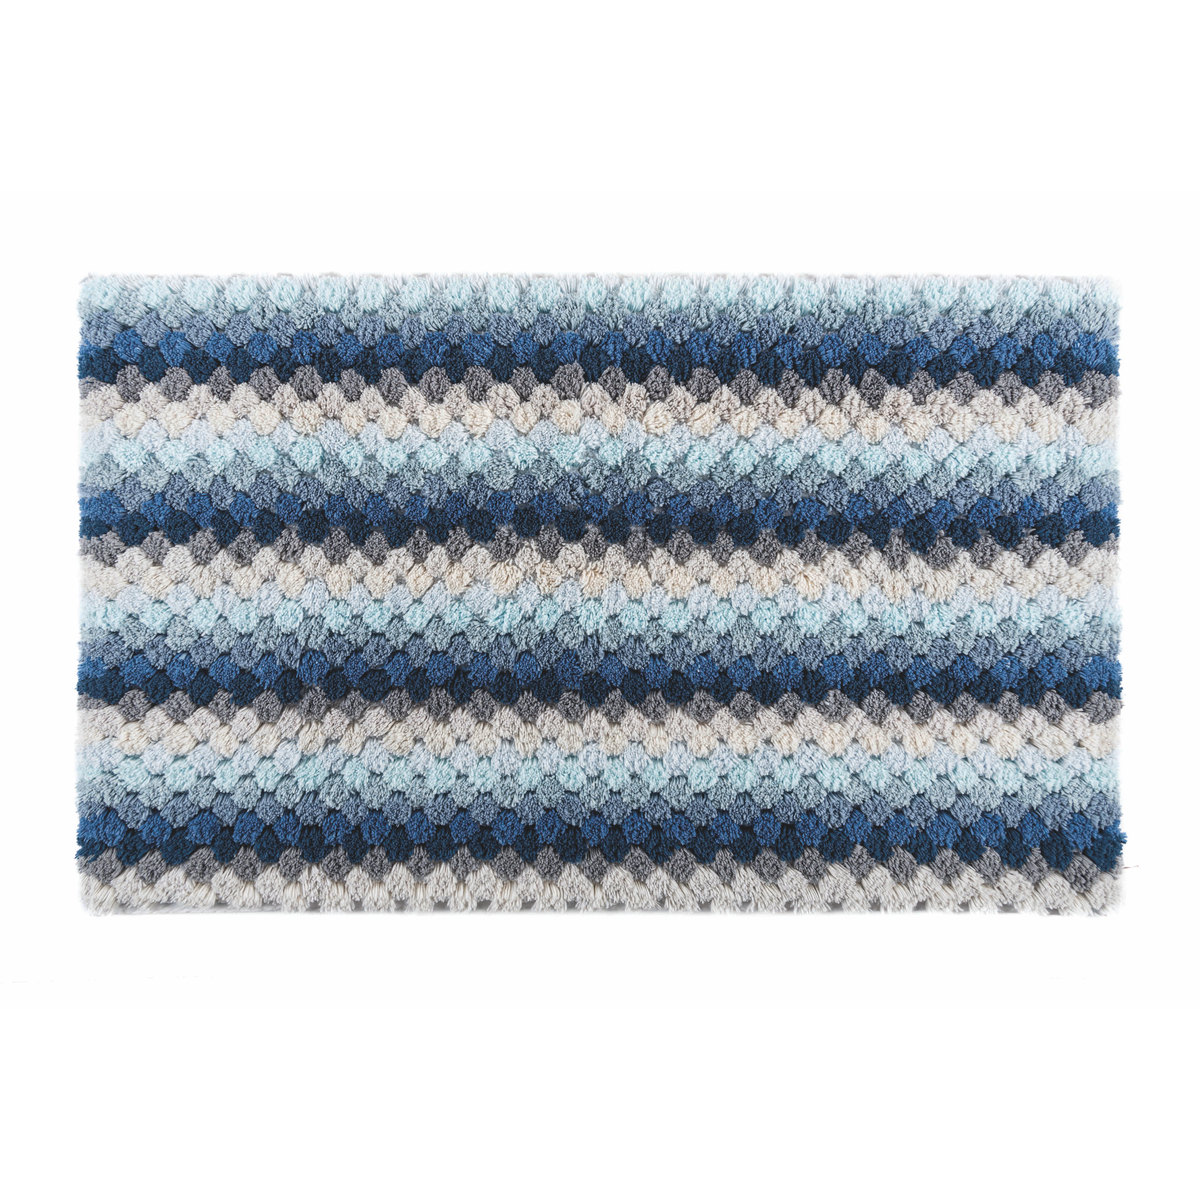 Top View of Graccioza Lollypop Bath Rug Against White Background in Color Blue